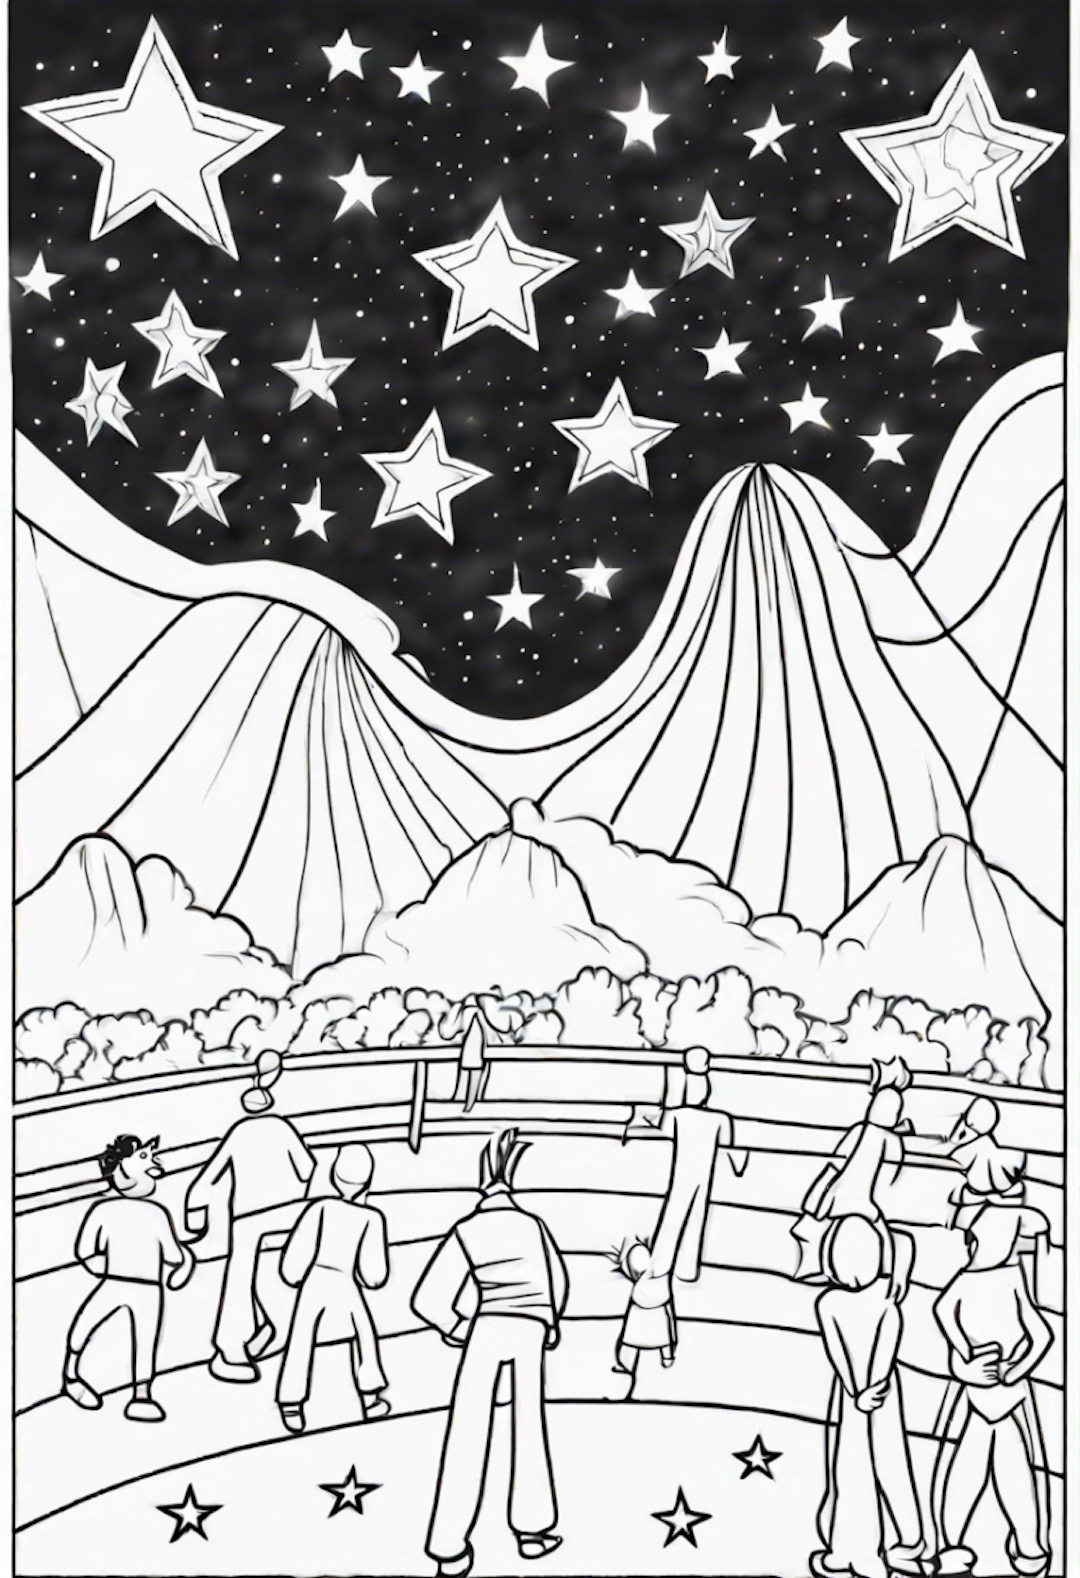 Stargazing with Friends in the Mountains coloring pages